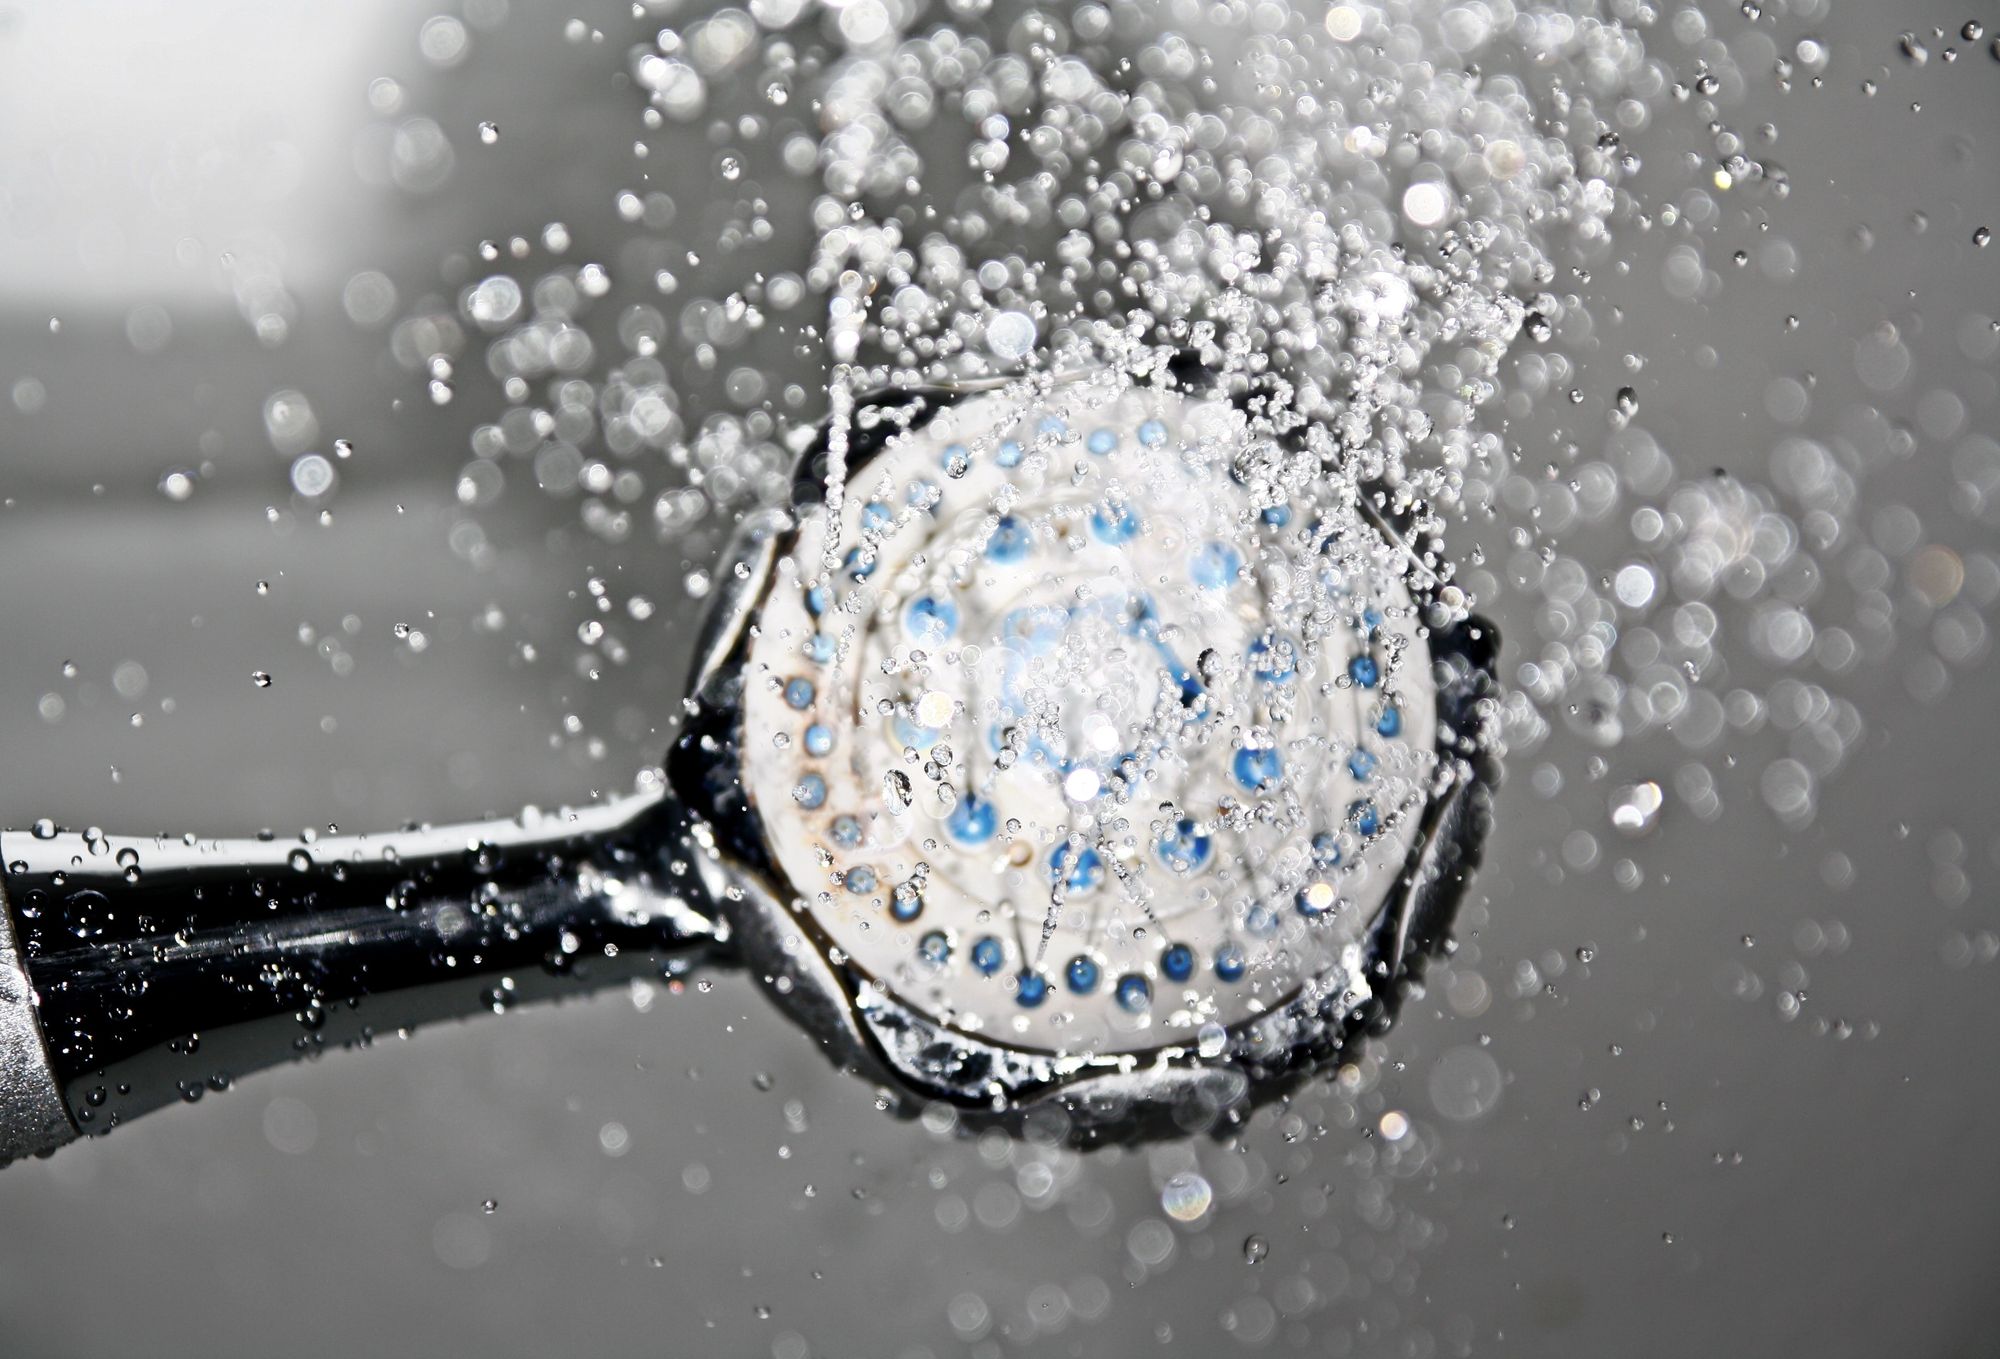 A shower head with running water.